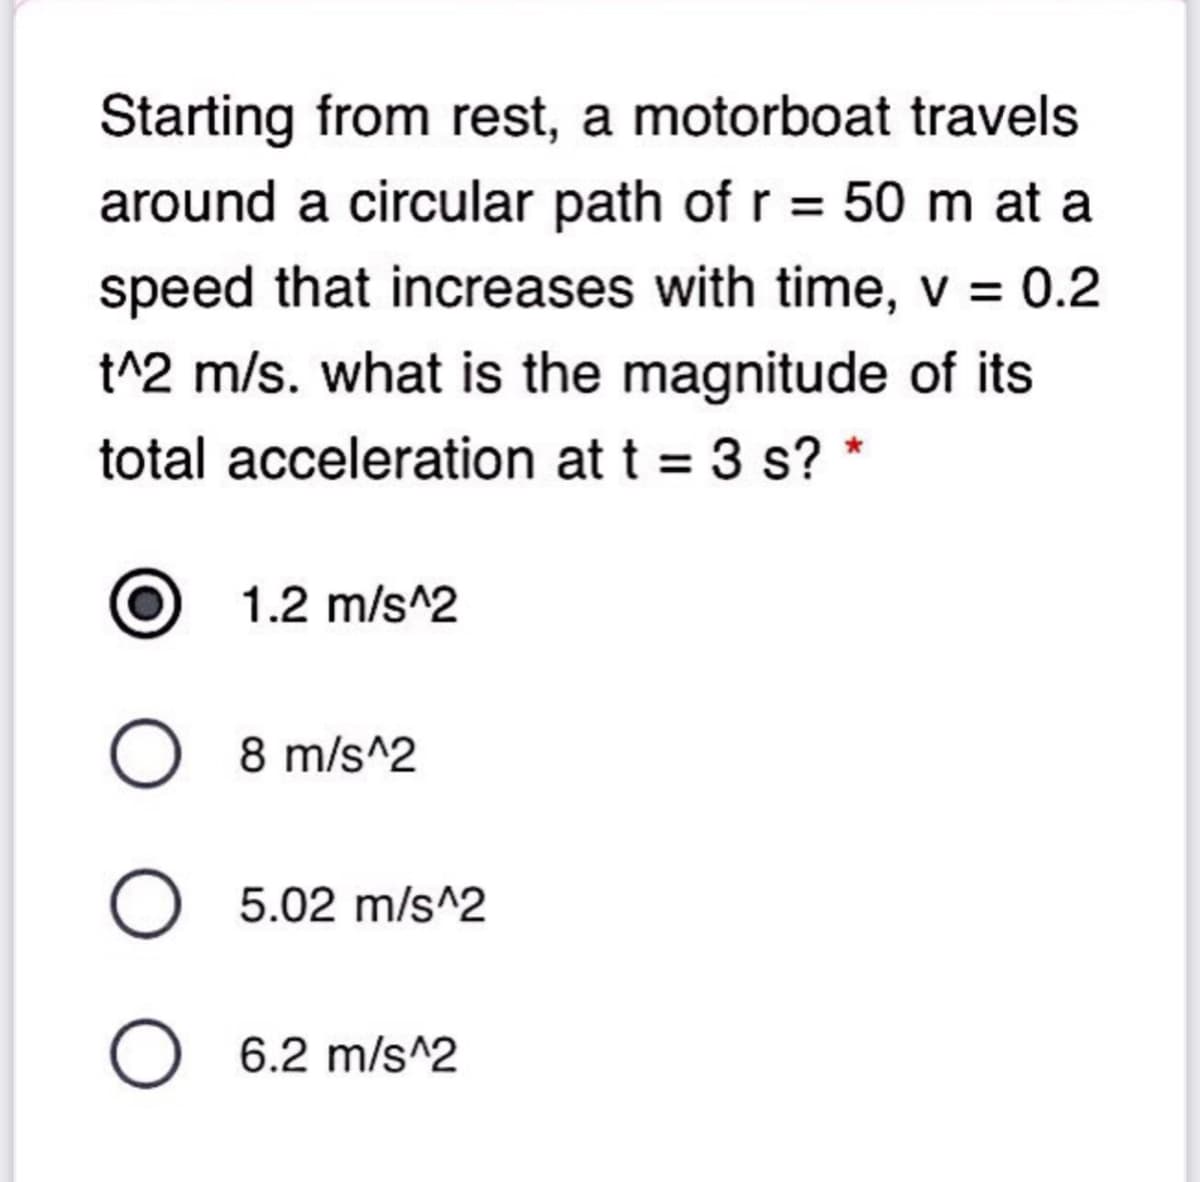 Starting from rest, a motorboat travels
around a circular path of r = 50 m at a
speed that increases with time, v = 0.2
t^2 m/s. what is the magnitude of its
total acceleration at t = 3 s? *
1.2 m/s^2
O 8 m/s^2
O 5.02 m/s^2
O 6.2 m/s^2
